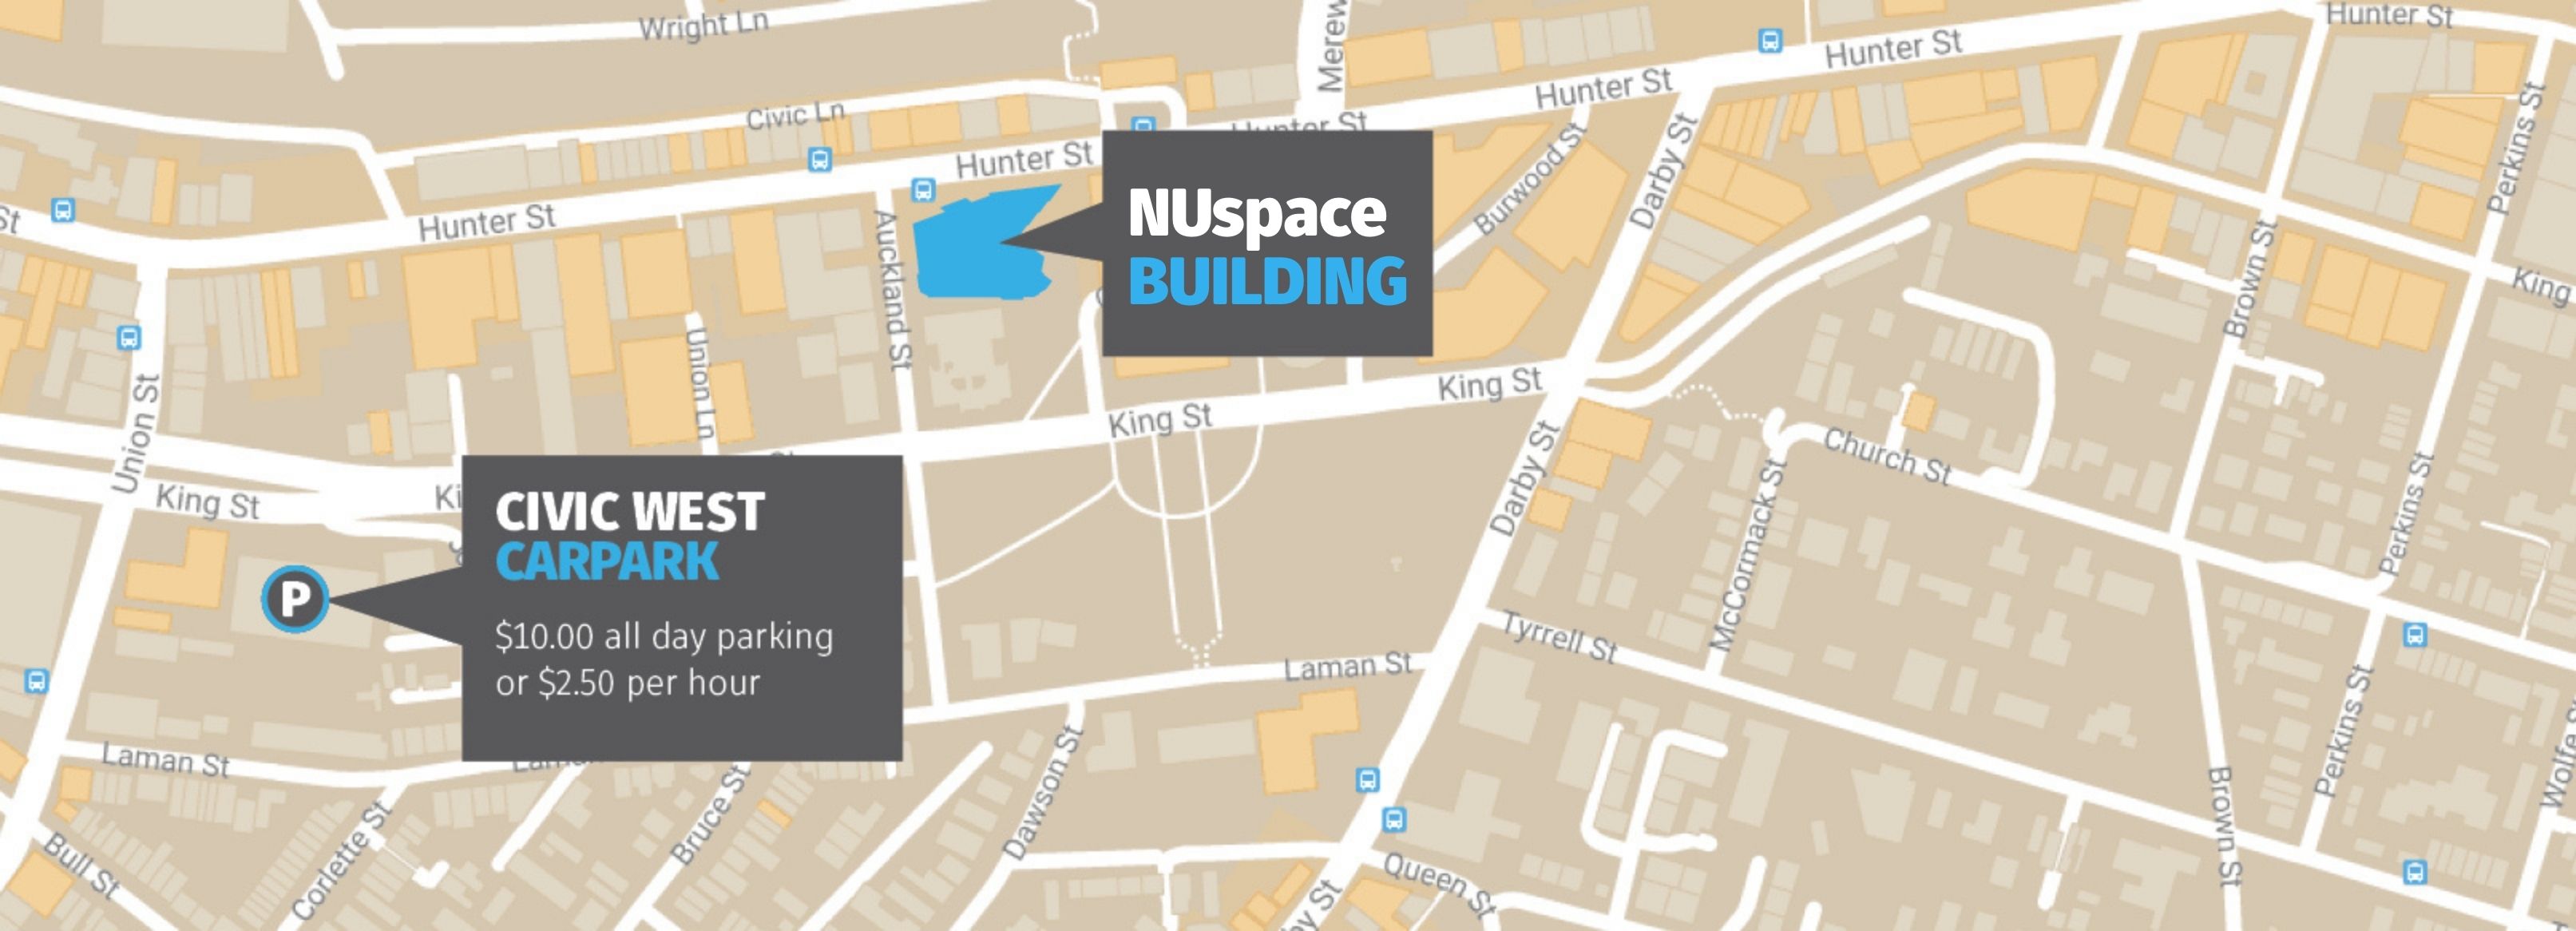 map of Civic west car park in relation to NUSpace